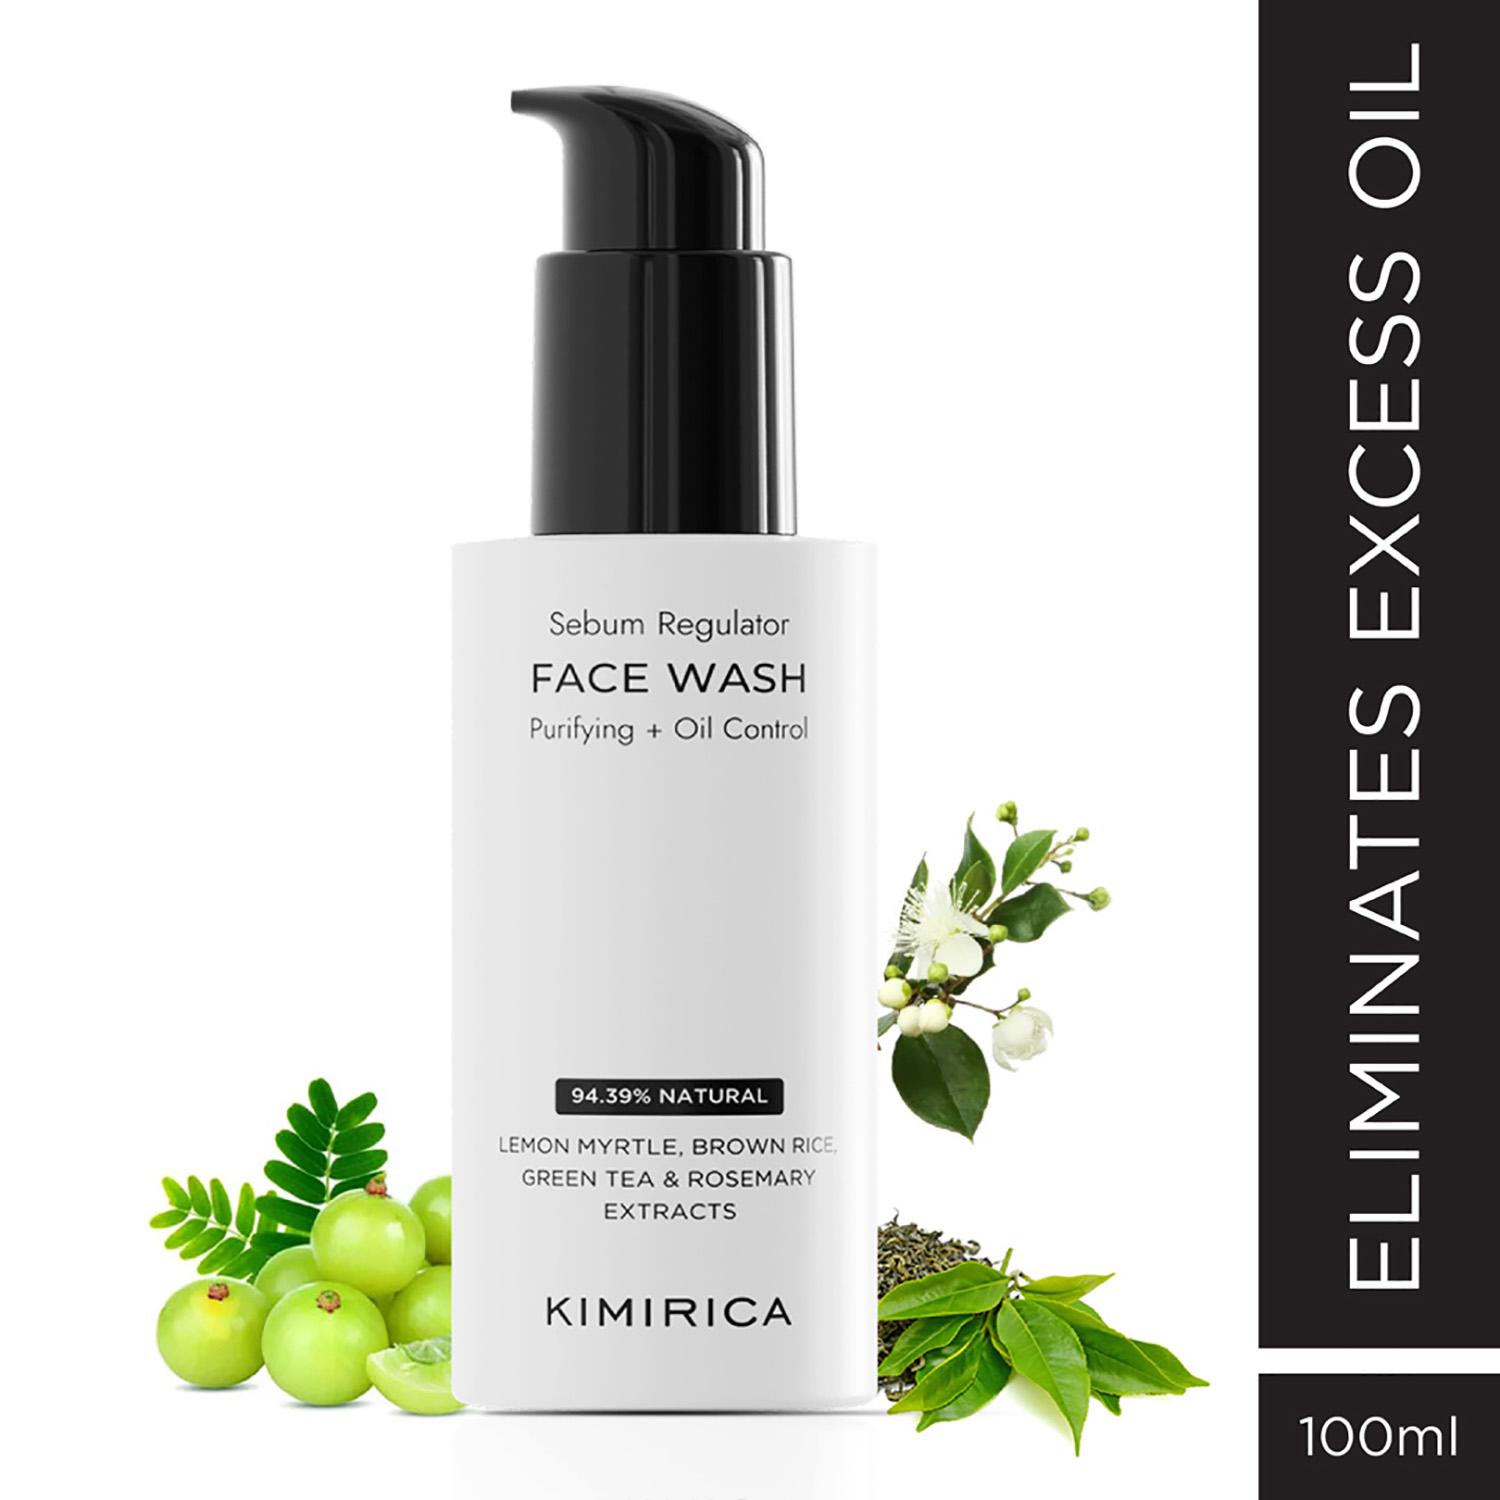 Kimirica | Kimirica Purifying Gel Face Wash for Oil Control with Green Tea Lemon Myrtle Brown Rice (100 ml)